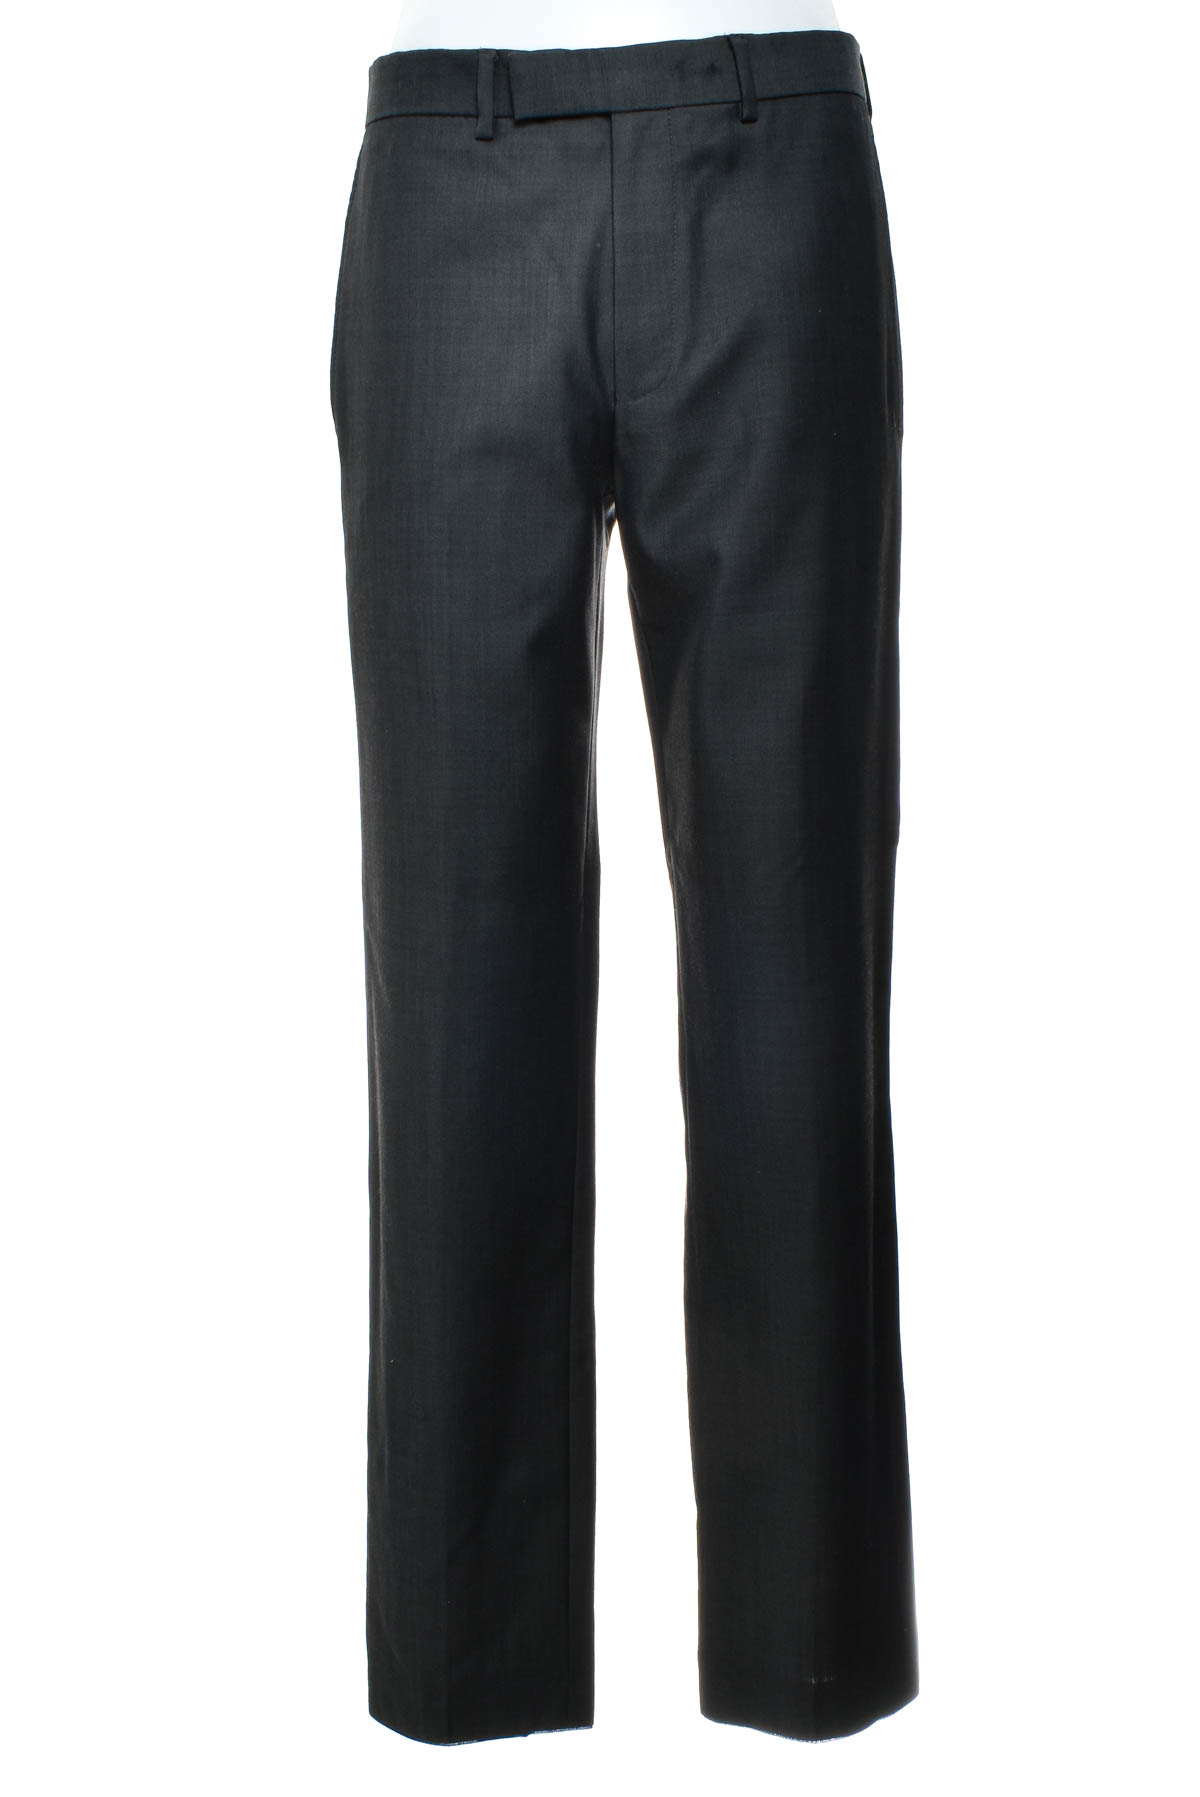 Men's trousers - SELECTION by S.Oliver - 0